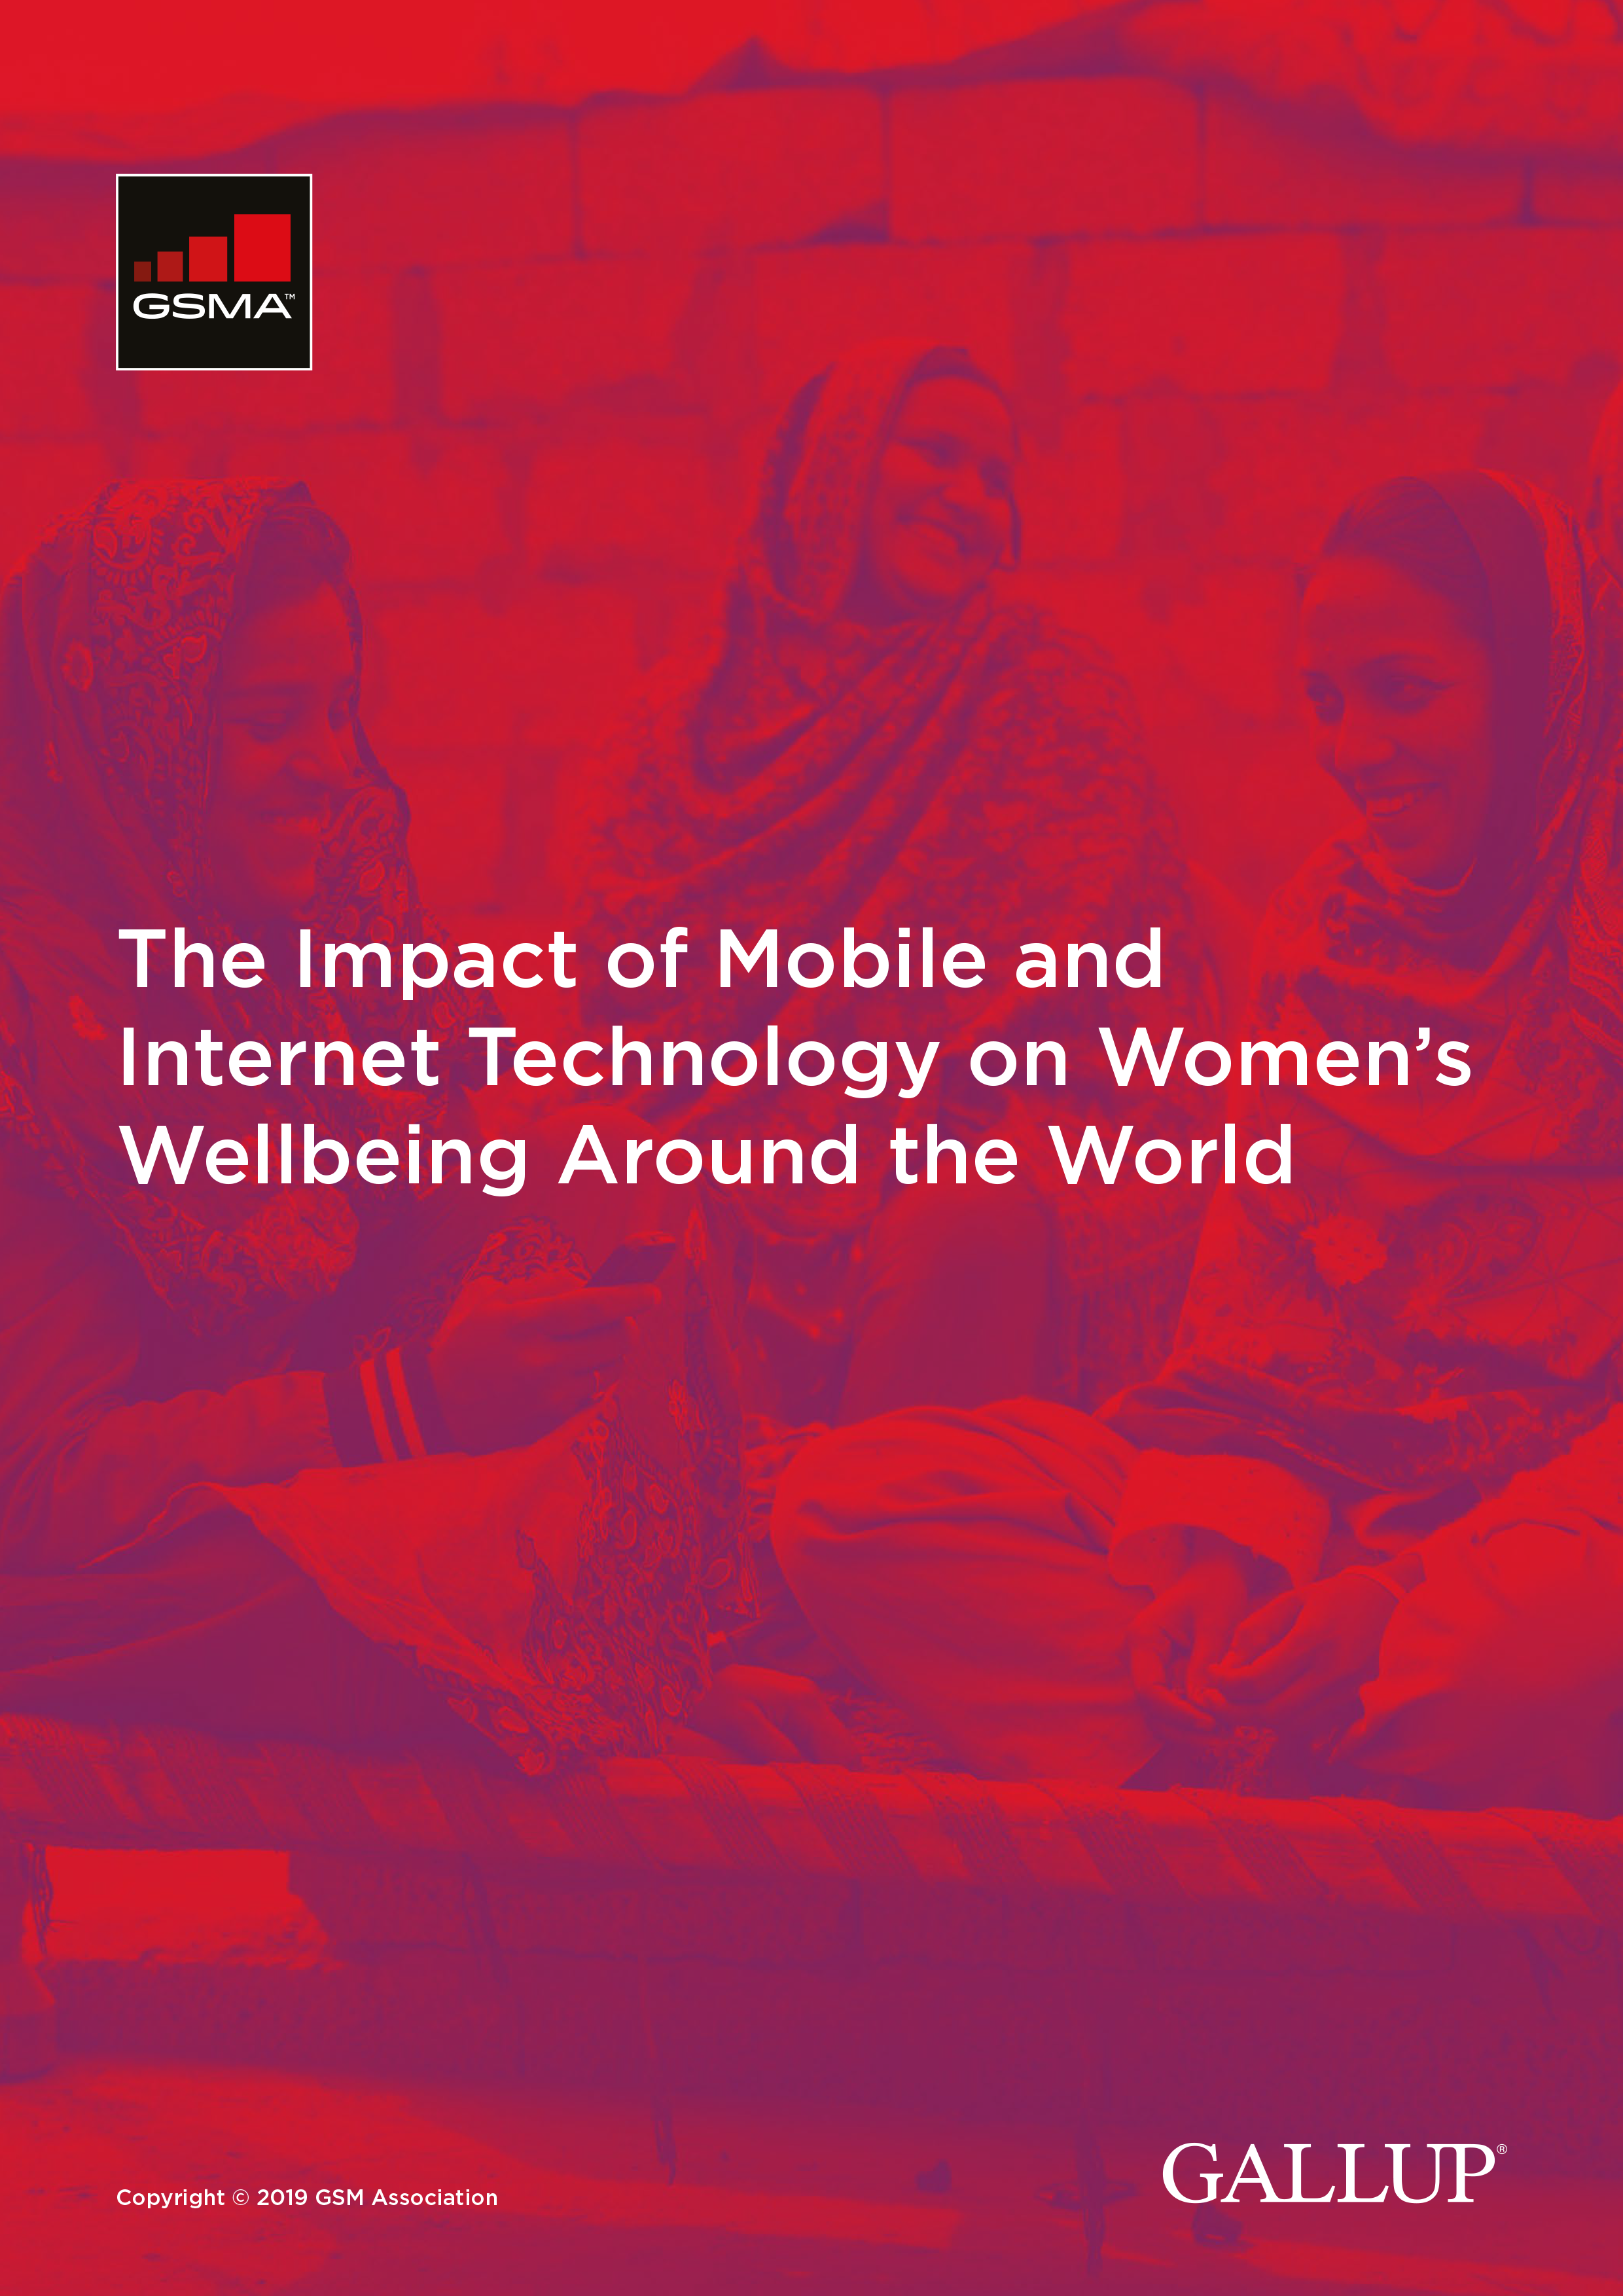 The Impact of Mobile and Internet Technology on Women’s Wellbeing Around the World image